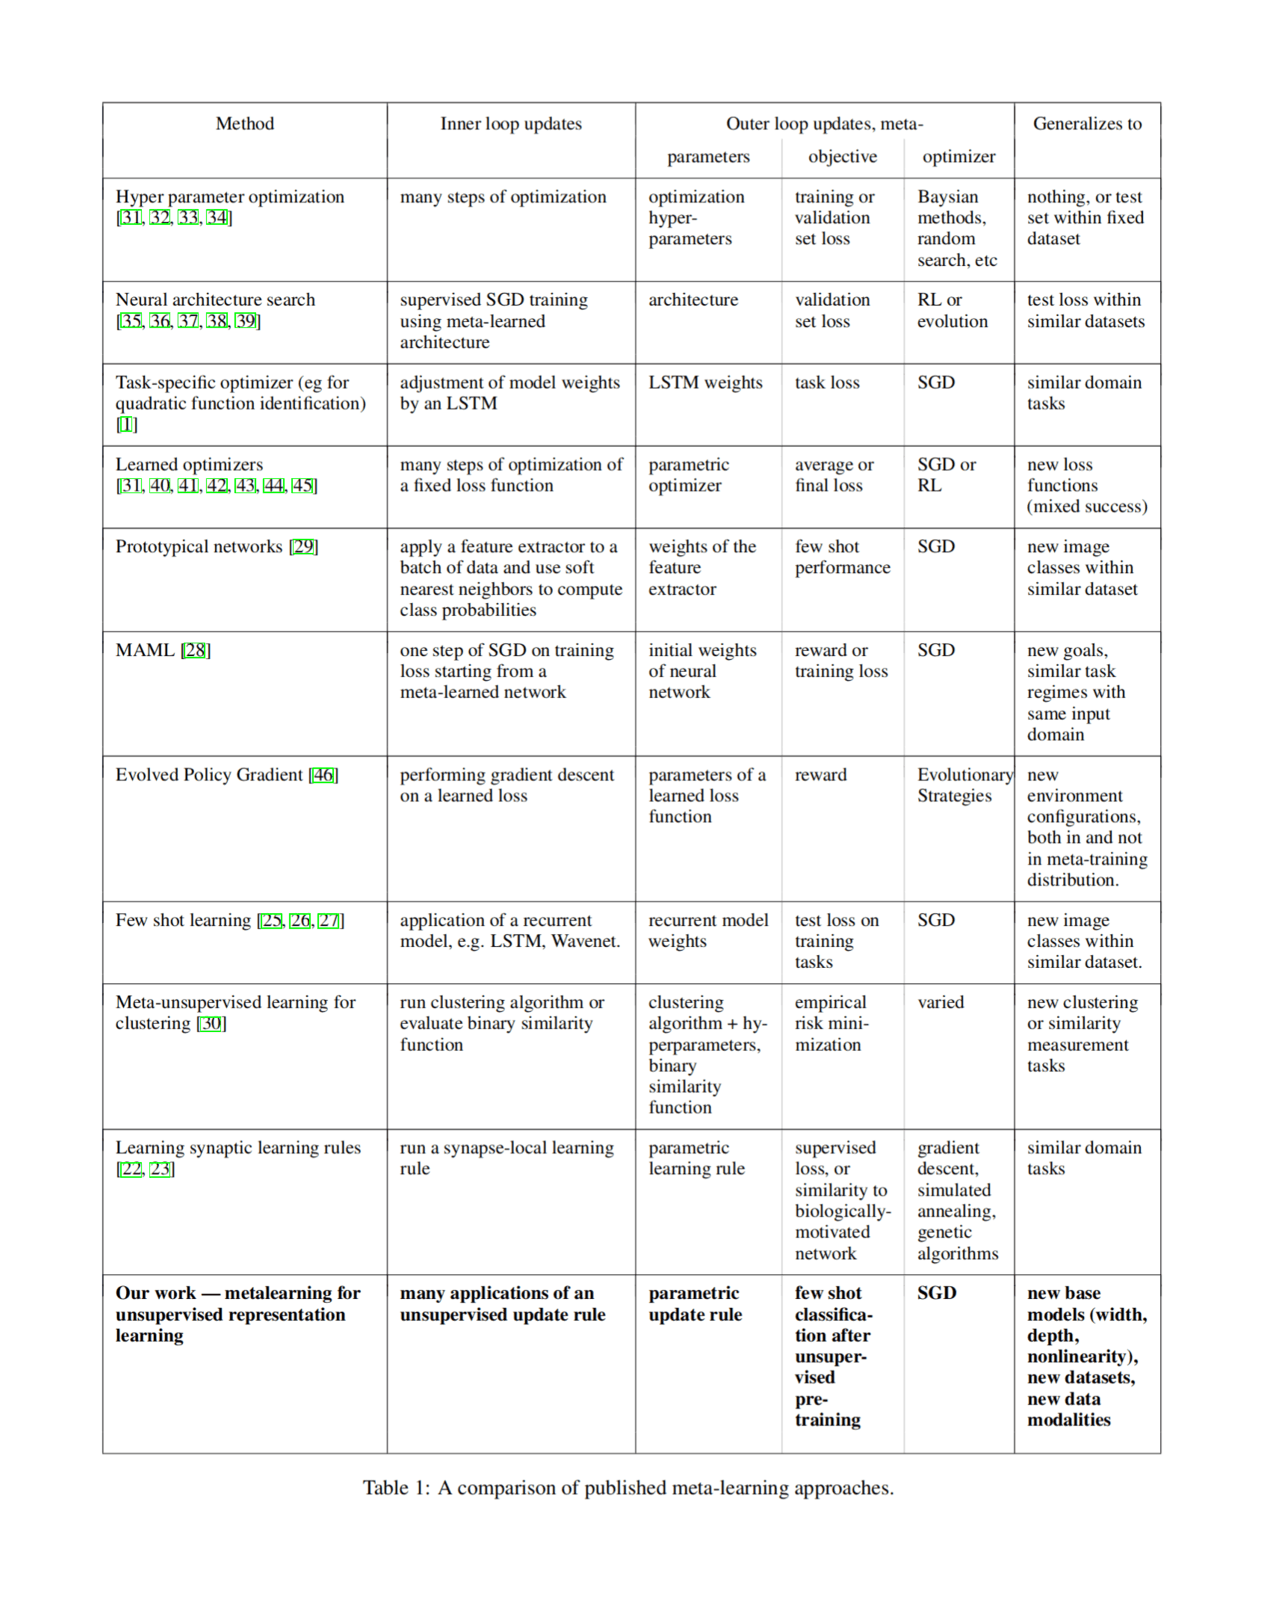 From Metz et al 2018: “Table 1. A comparison of published meta-learning approaches.”